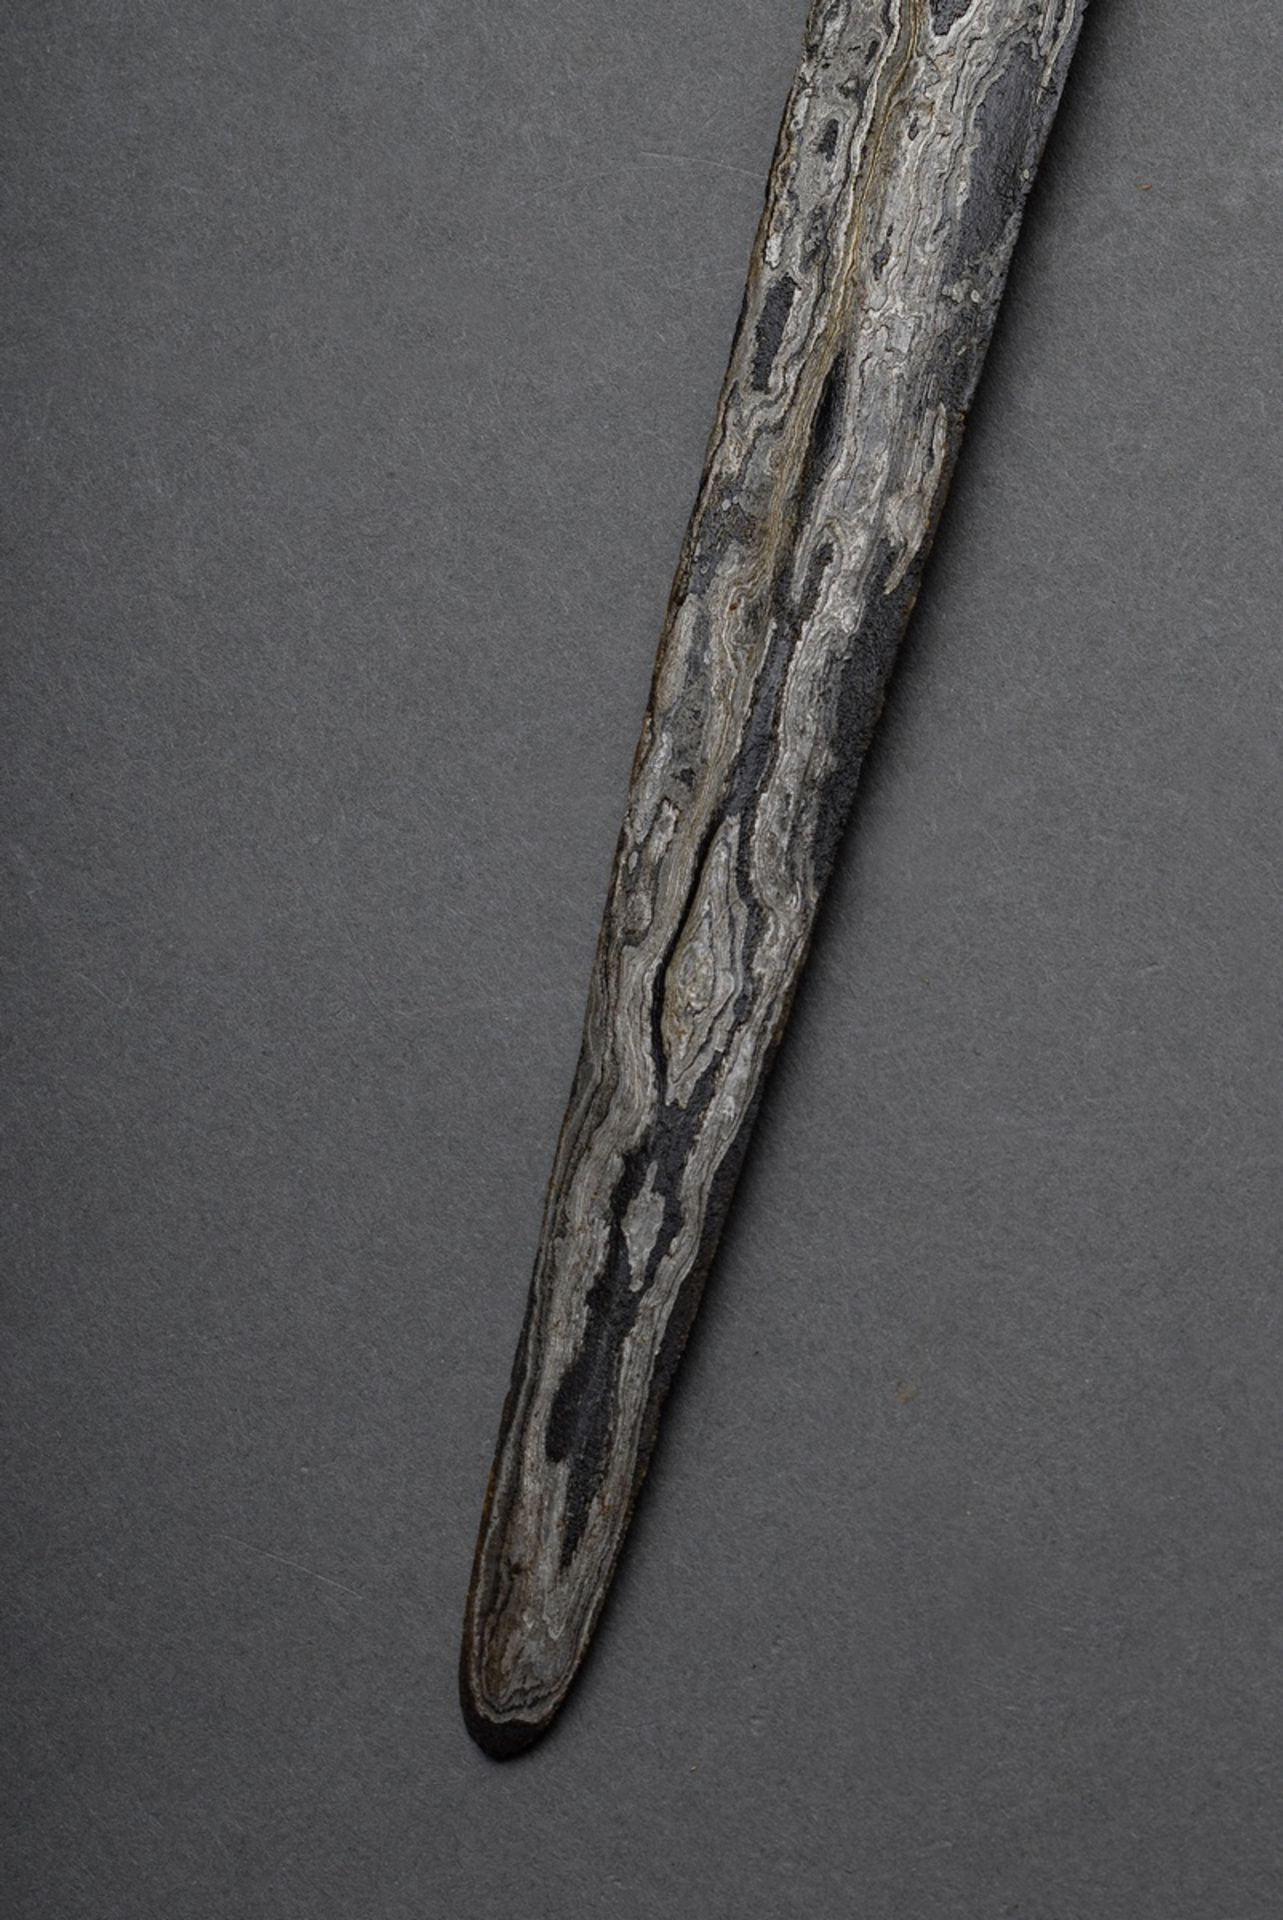 Indonesian kris: Dapur Bener, straight blade with flamed pamor (19th c.), strongly developed janur  - Image 8 of 10